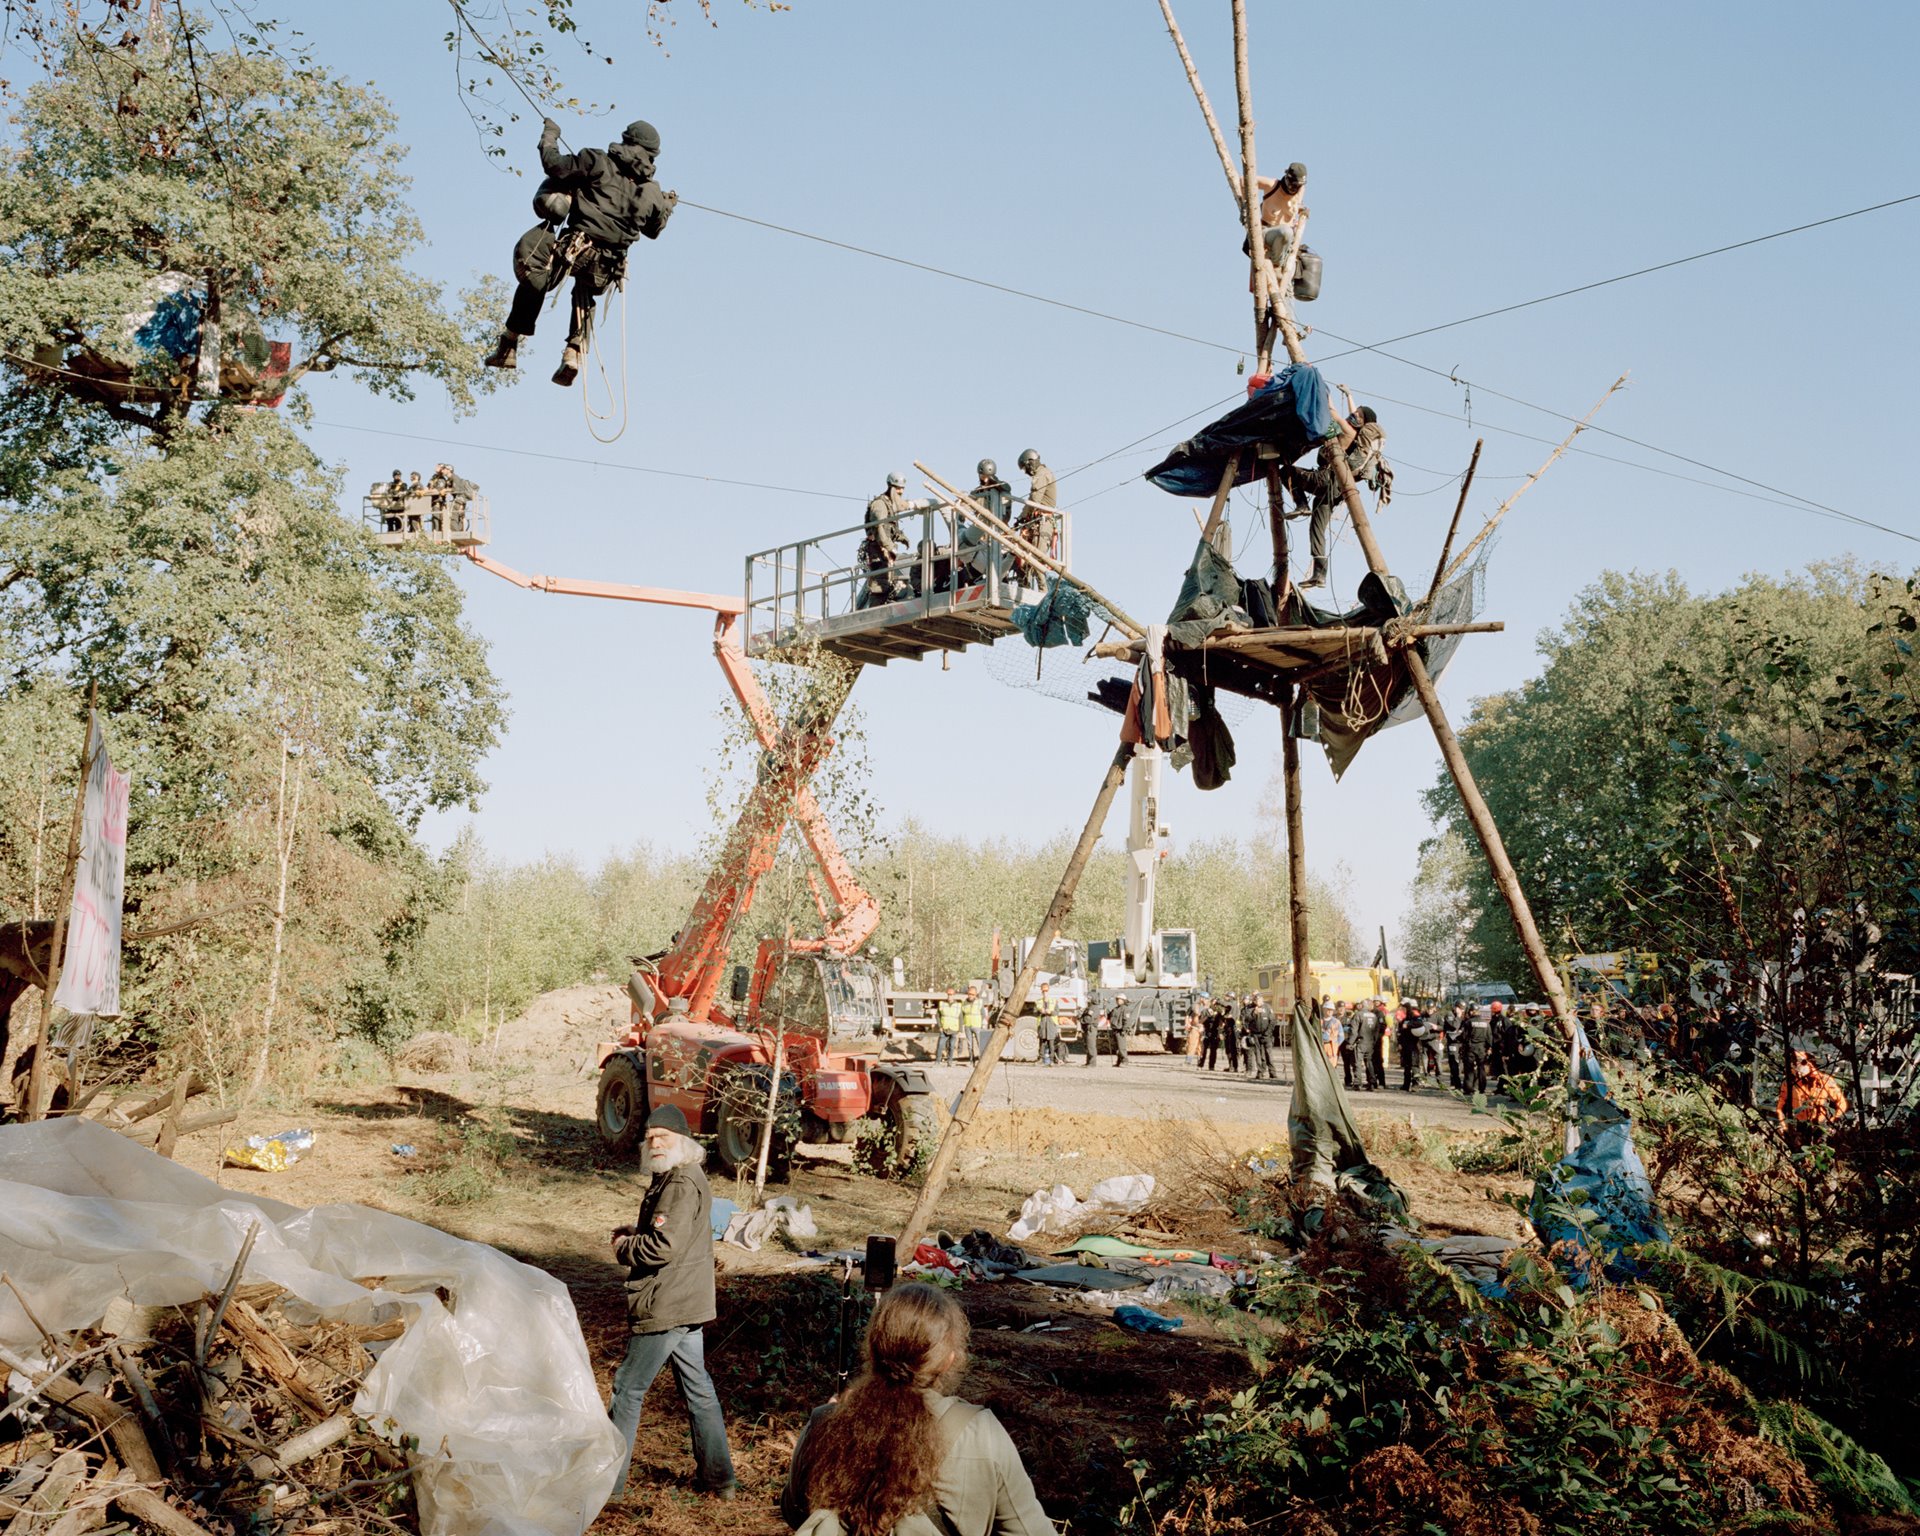 Police officers clear Lorien, the last remaining tree-house occupation in Hambach Forest. Merzenich, Germany.